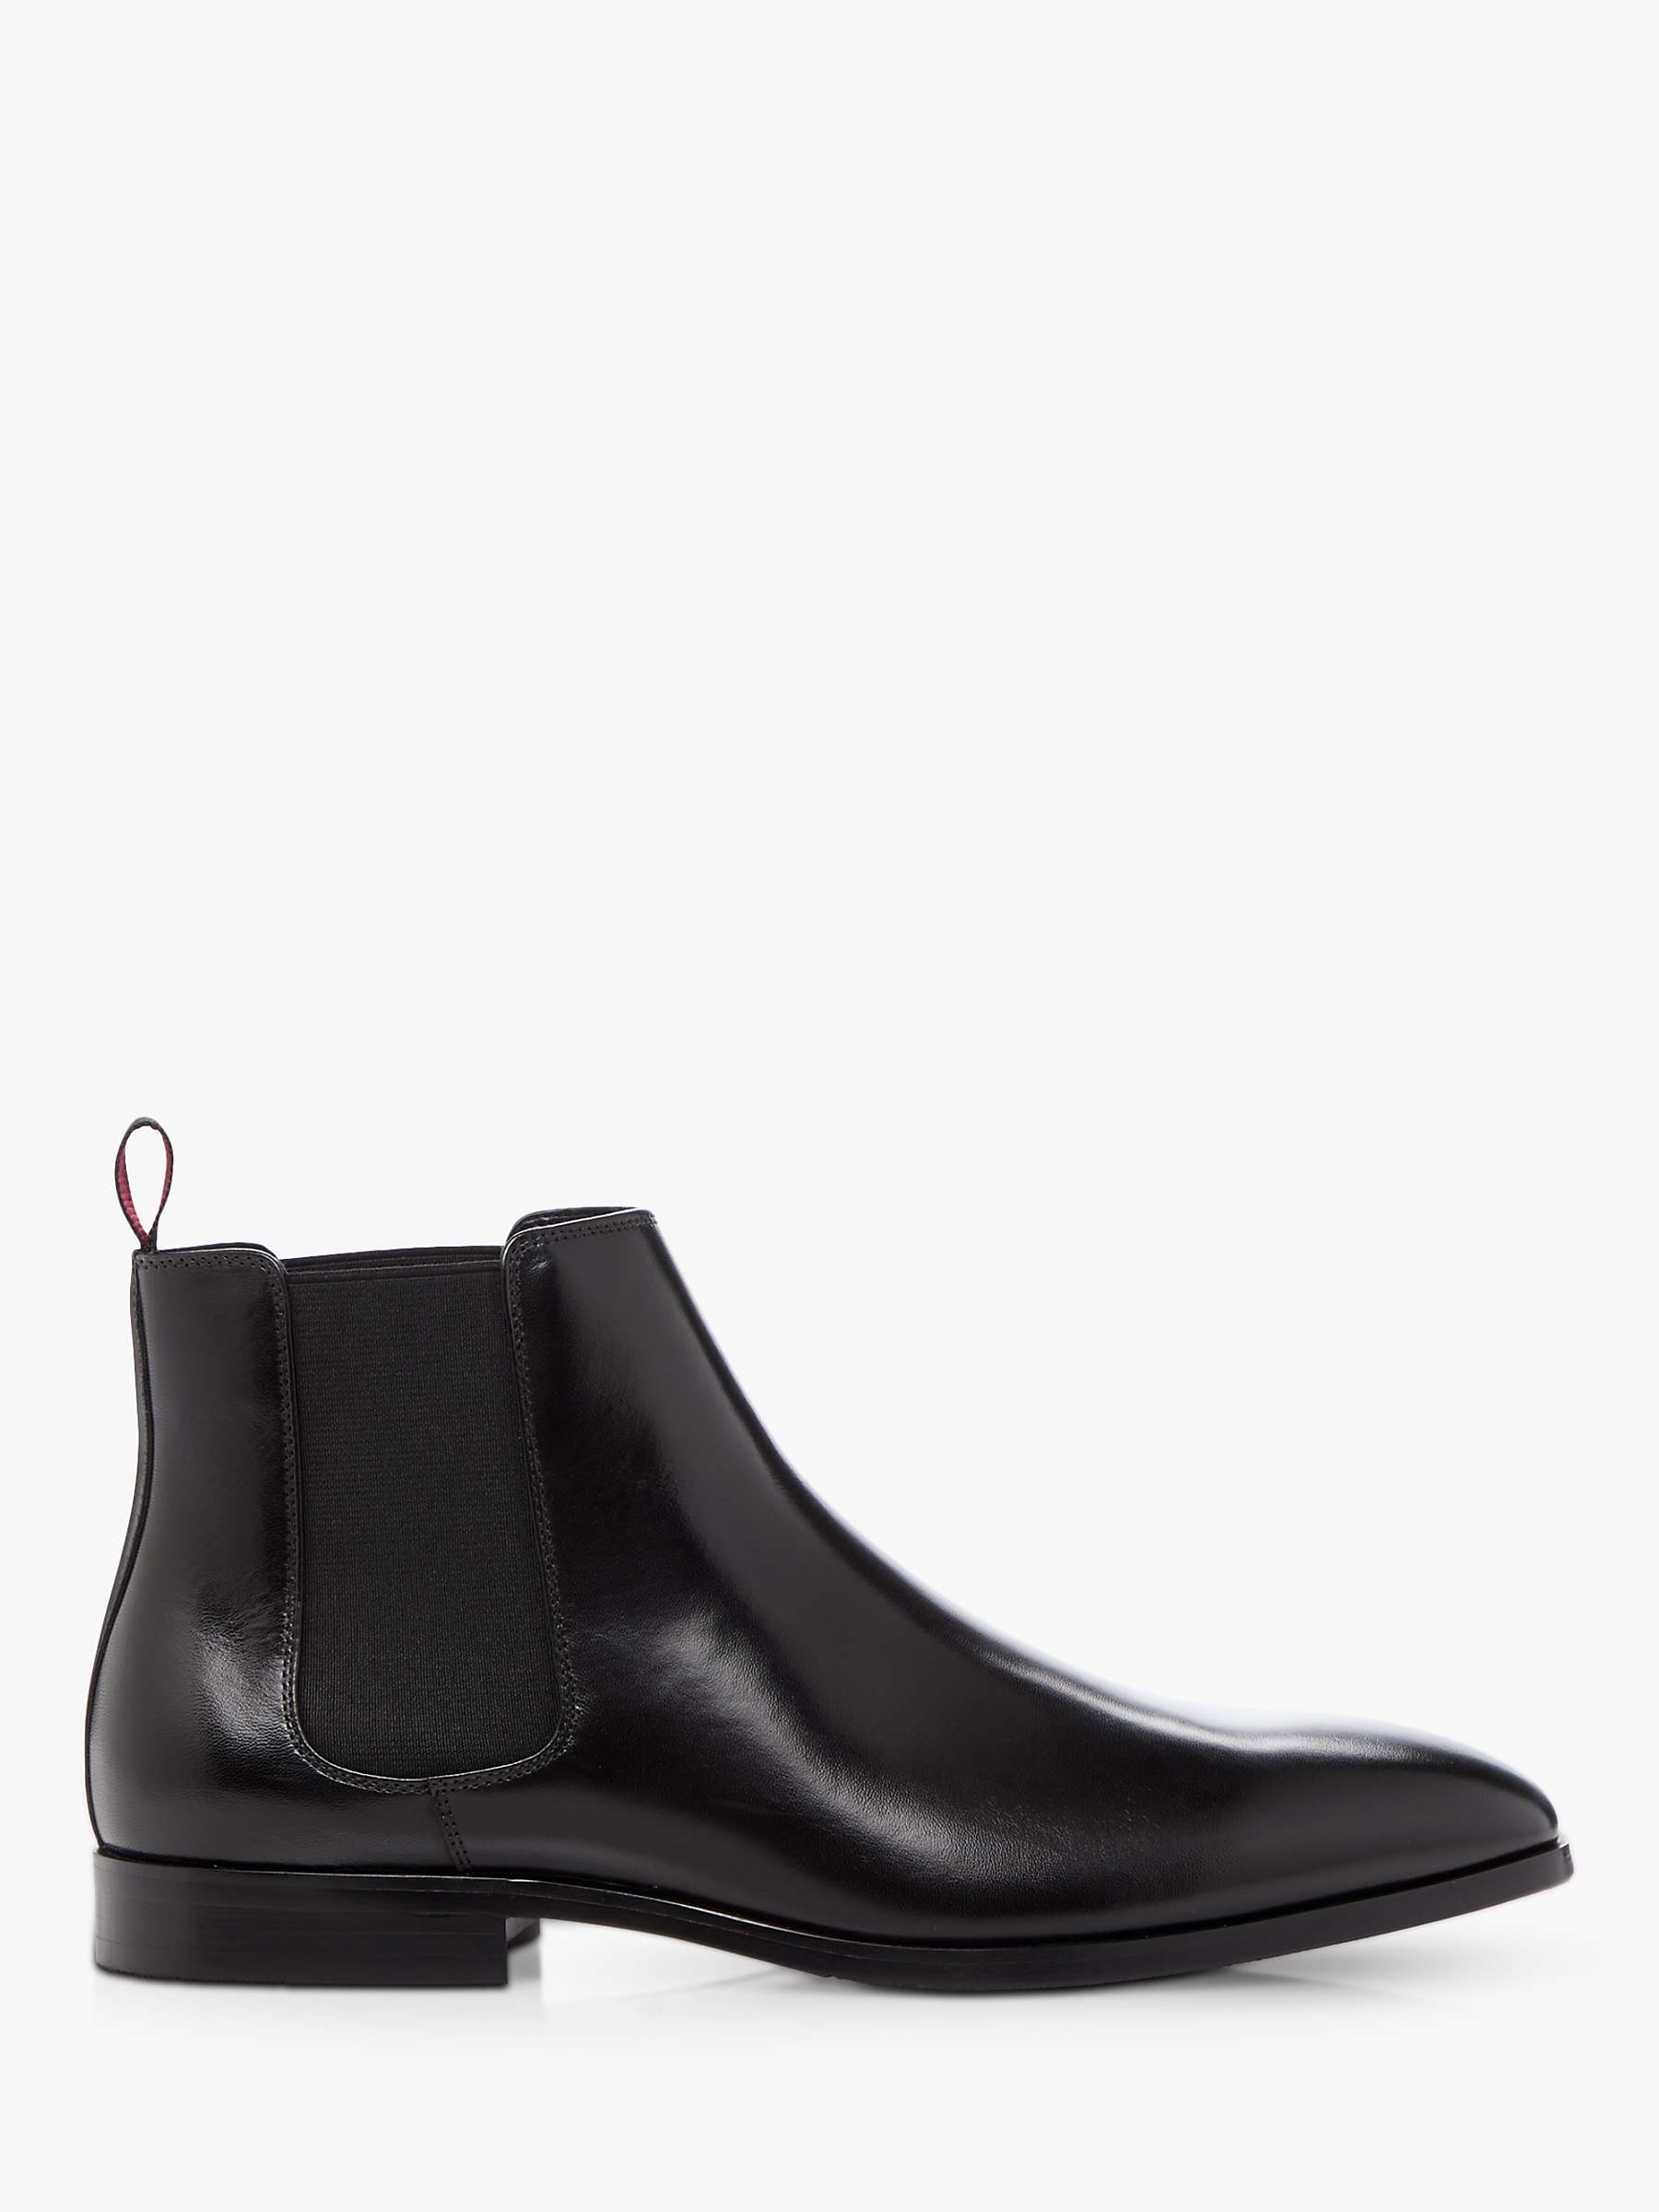 Totême Black Square Toe Leather Chelsea Boots | Browns - Wishupon